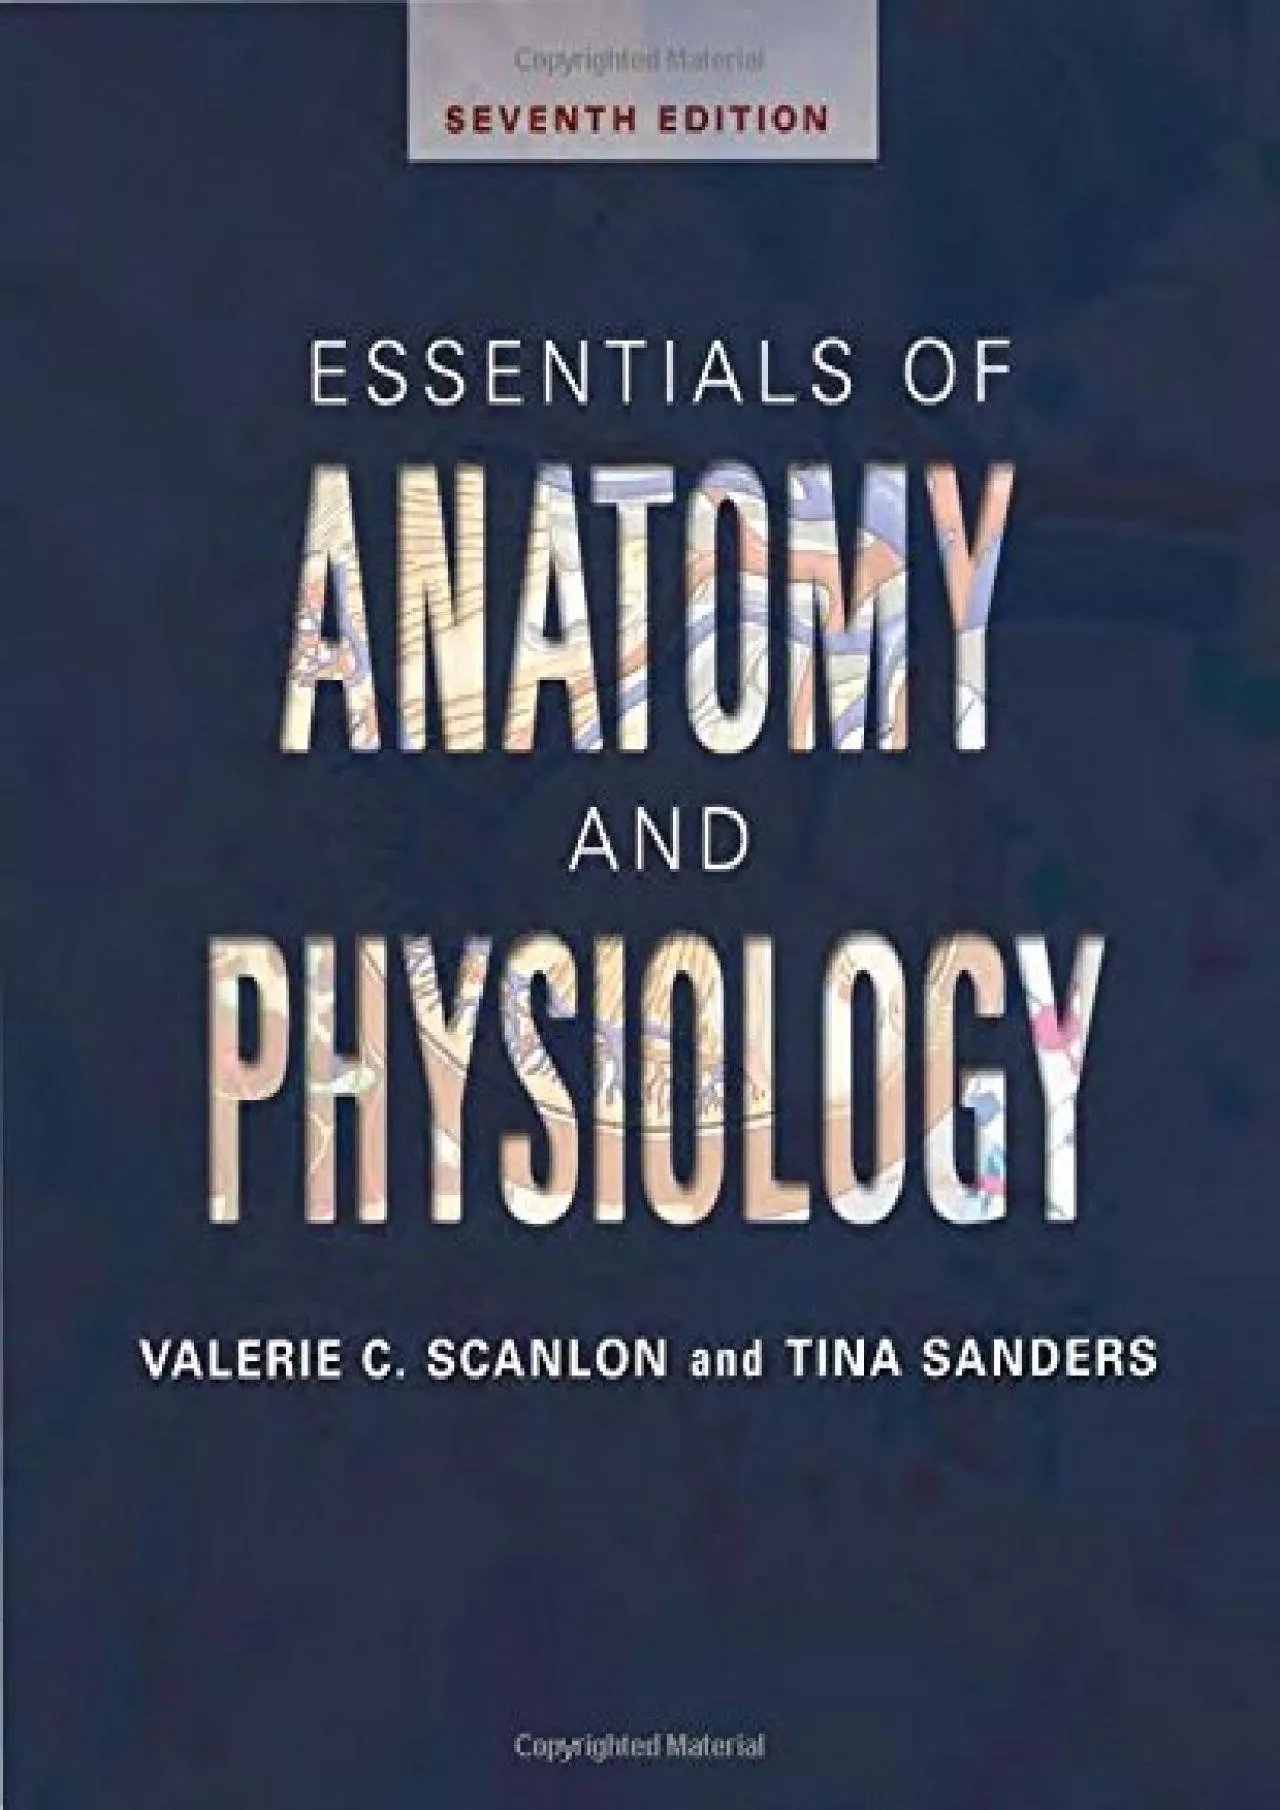 (DOWNLOAD)-Essentials of Anatomy and Physiology